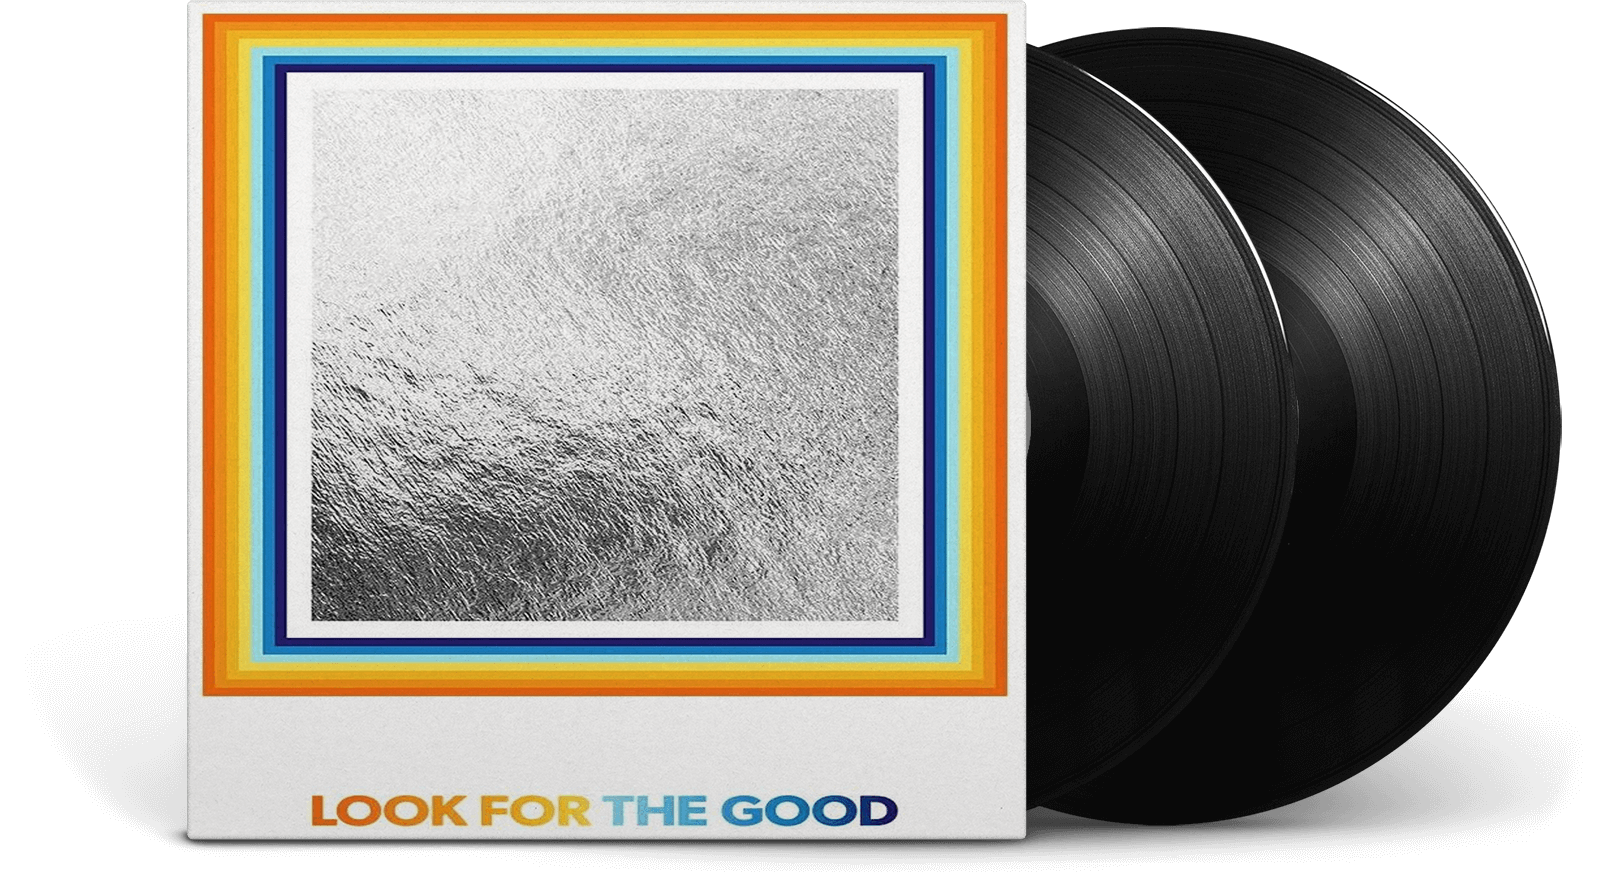 Jason Mraz - Look For The Good – new single out now!